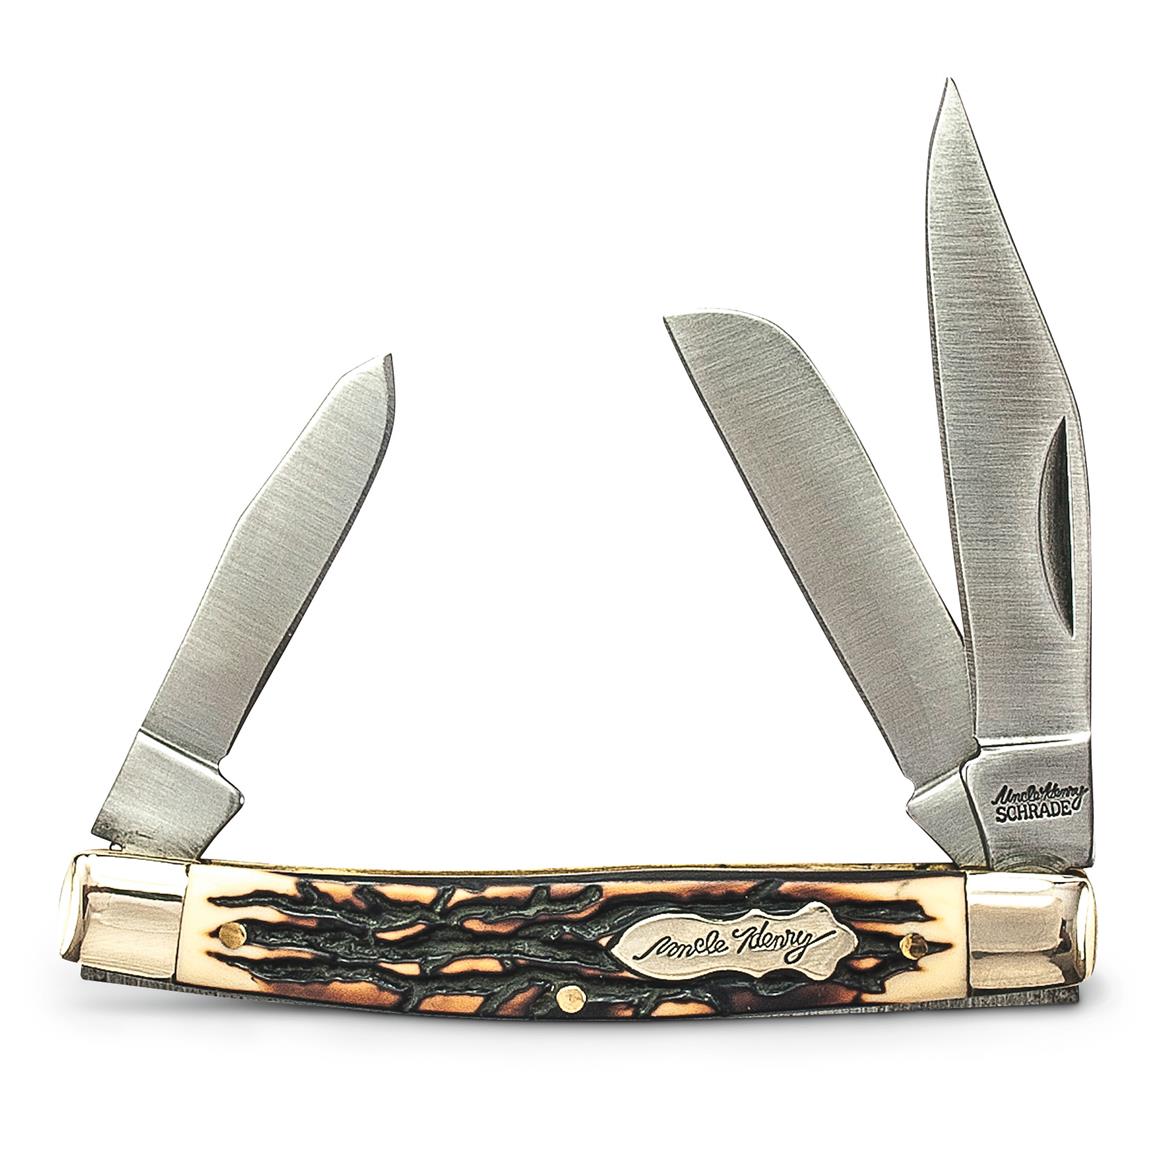 Schrade Uncle Henry Limited Edition Folding Knife Gift Tin Set, 3 Piece